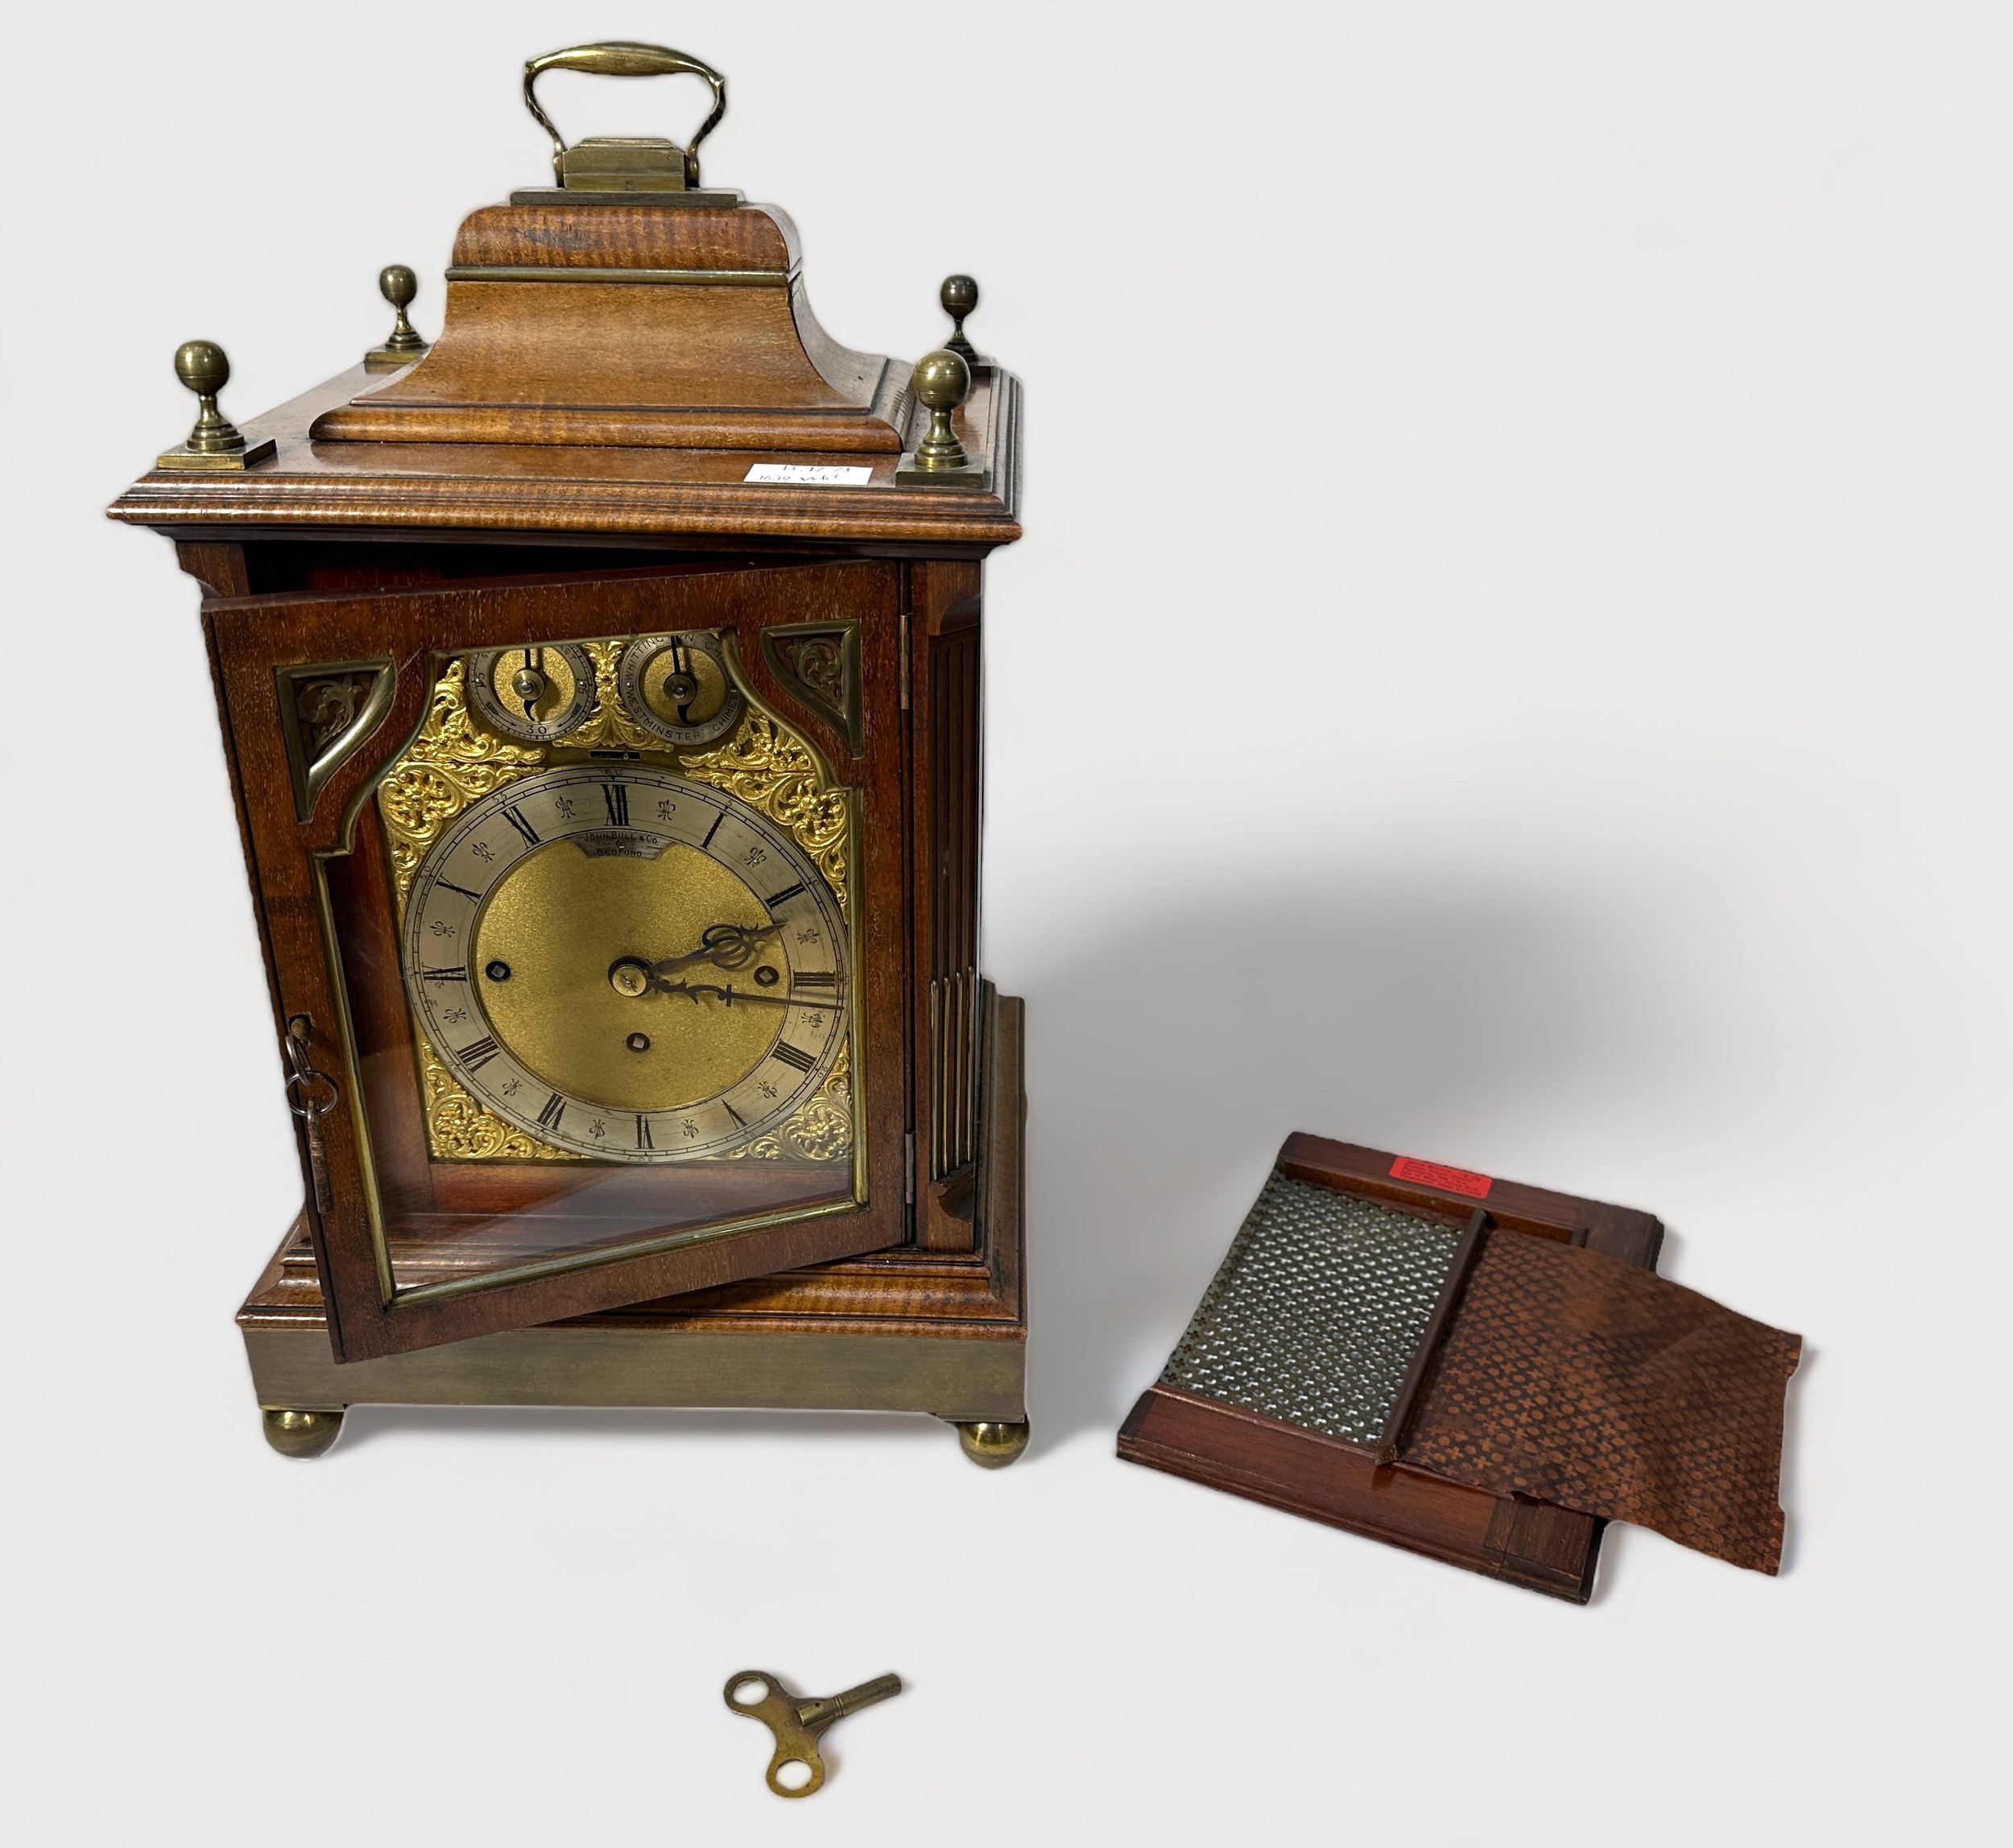 A Late 19th/early 20th century Mahogany Bracket clock by John Bull, Bedford, with Eight-Day three-